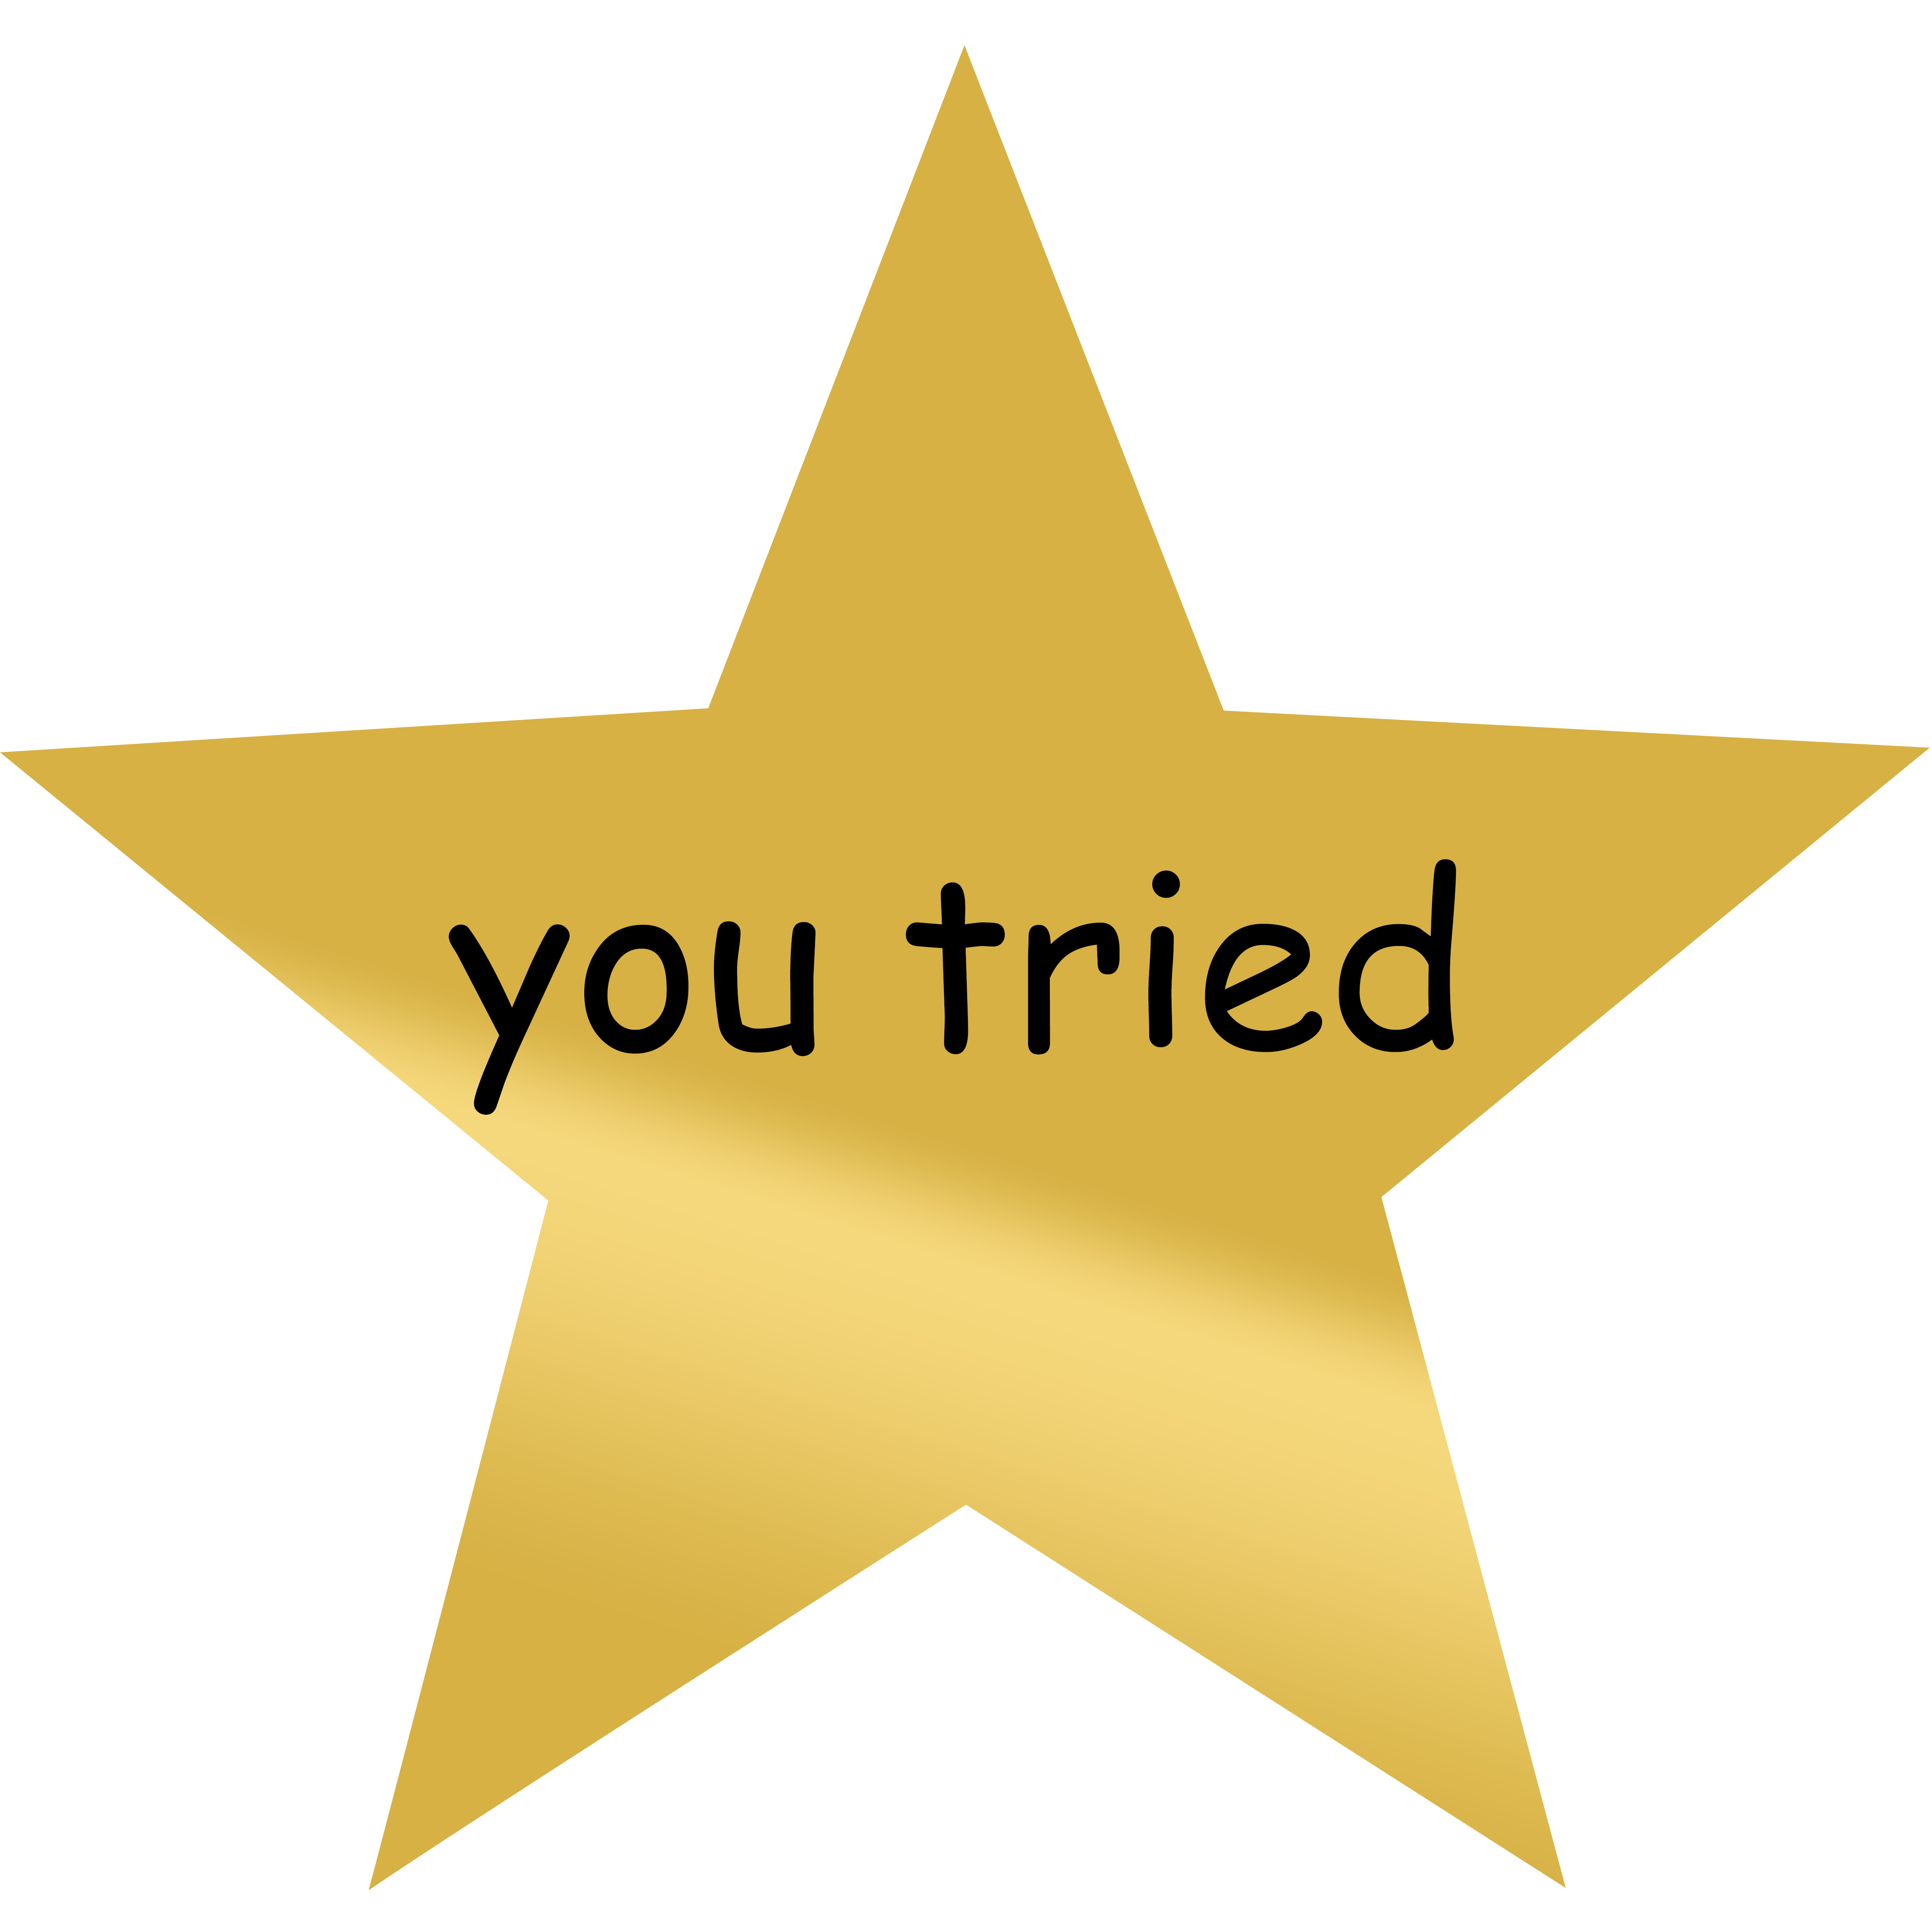 Clipart of a golden star with Comic Sans text saying "you tried" on it